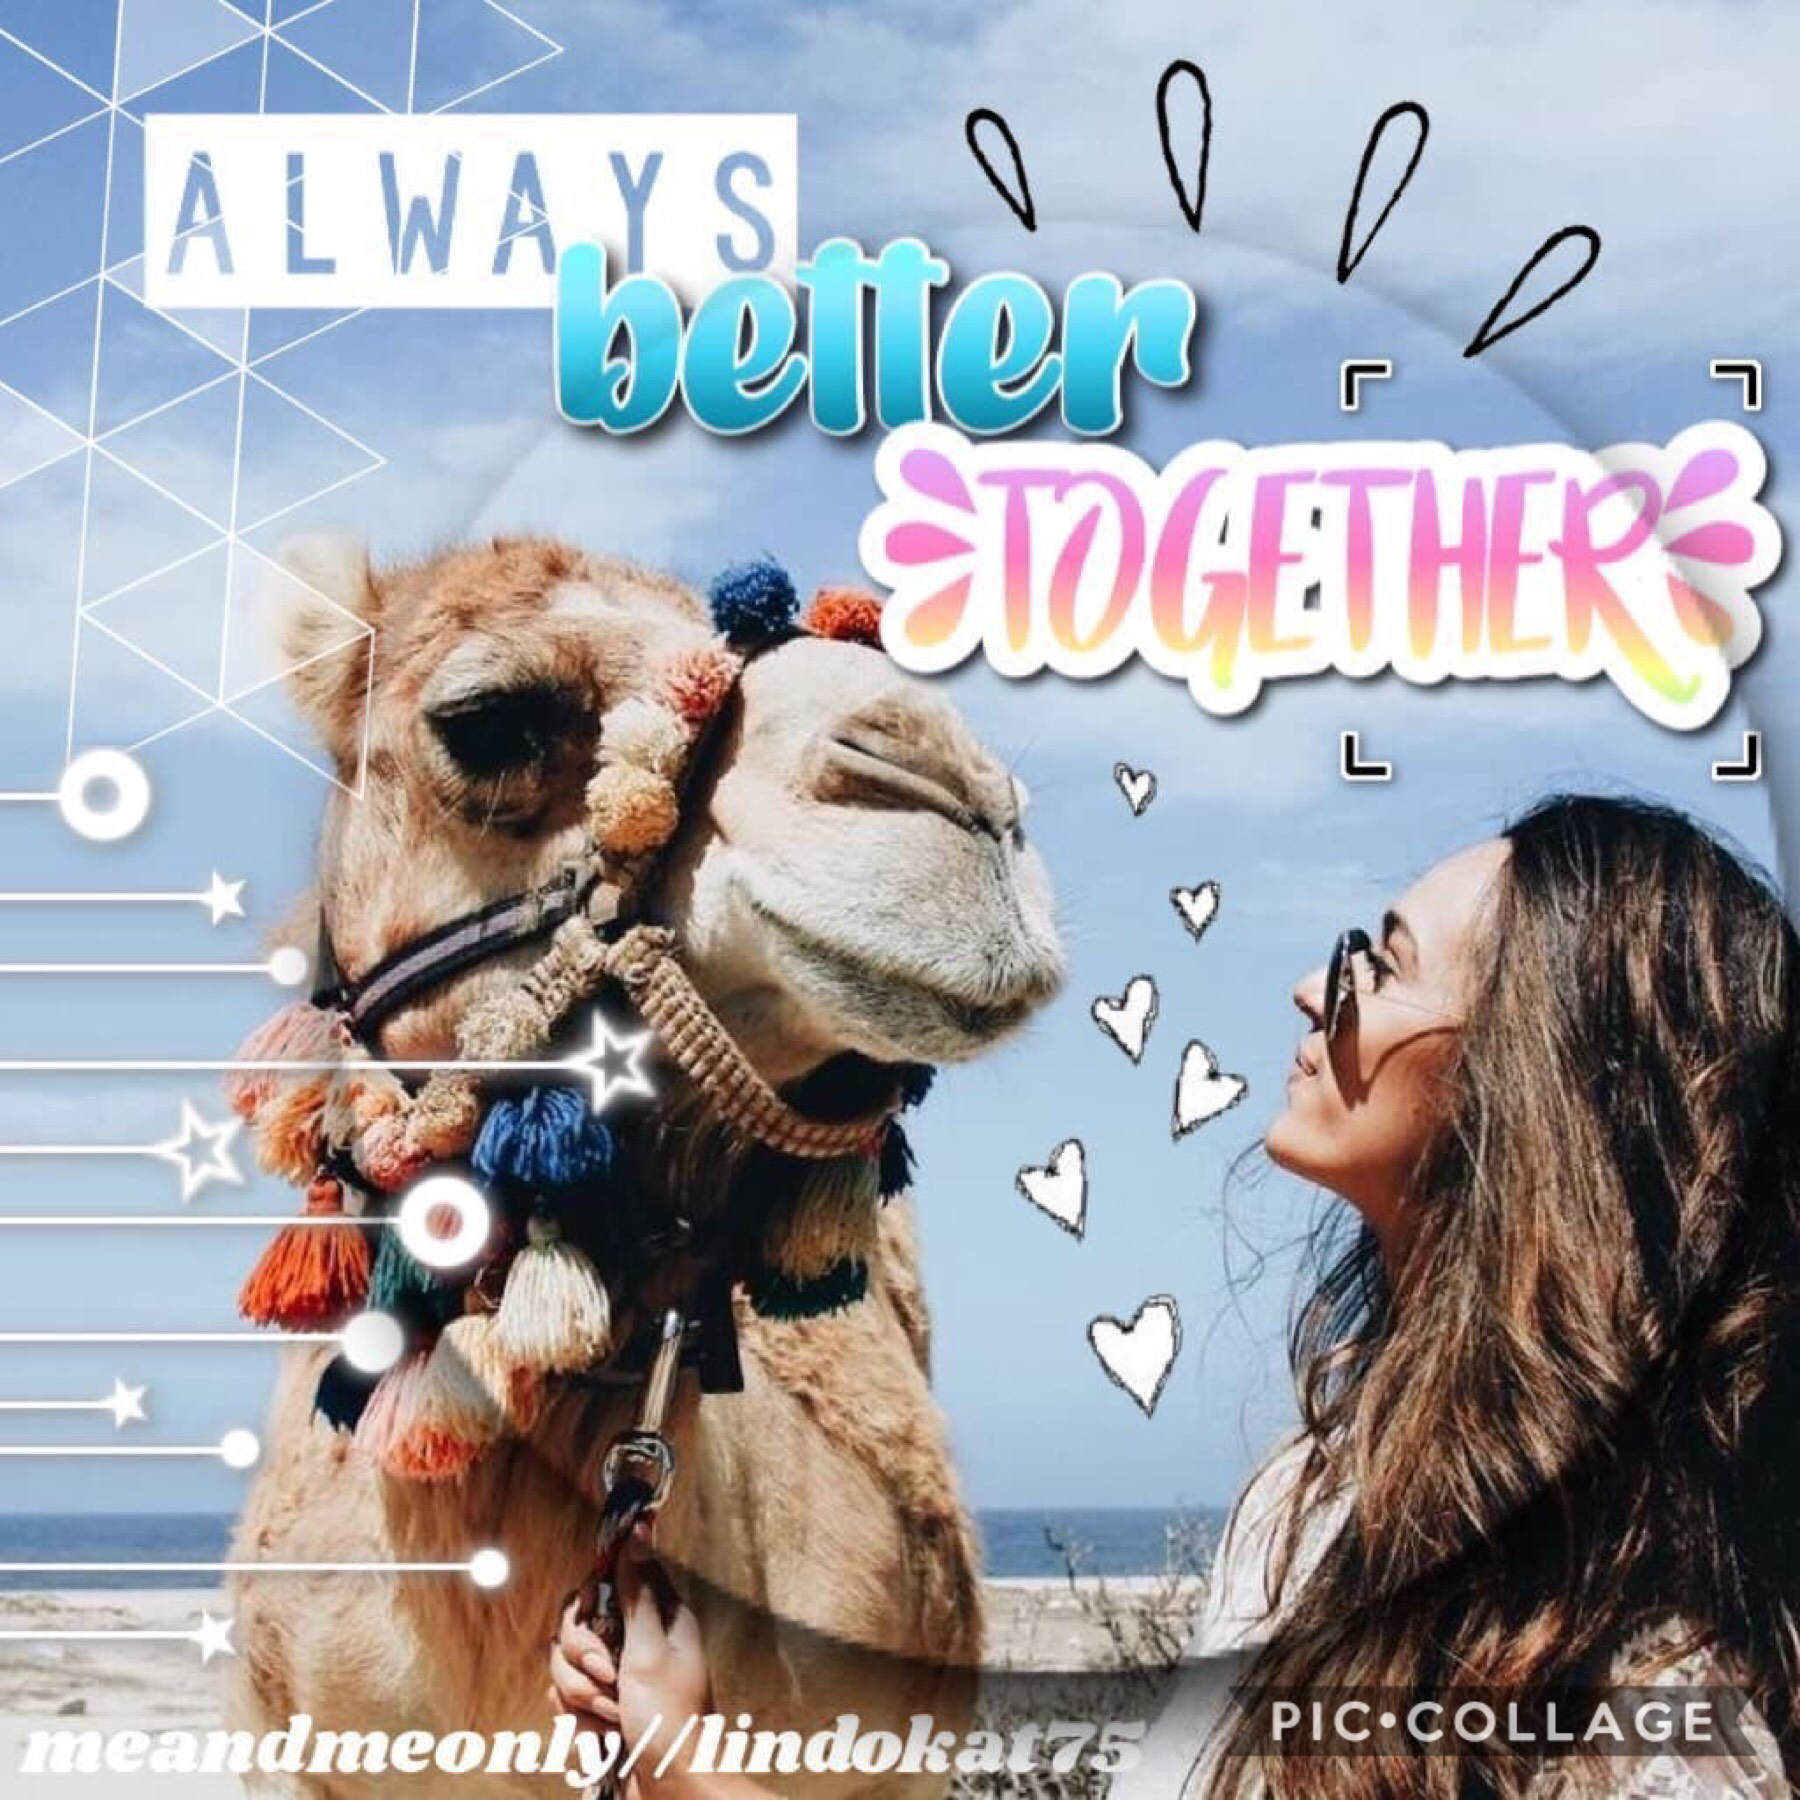 collab with the fab queen 👑....
lindokat75!!! everyone go follow her, she’s super amazing and makes the cutest collages. sorry everyone for so many collabs, I think I have a few more to post and I’ll be able to post my own collages soon ❤️ please go show 